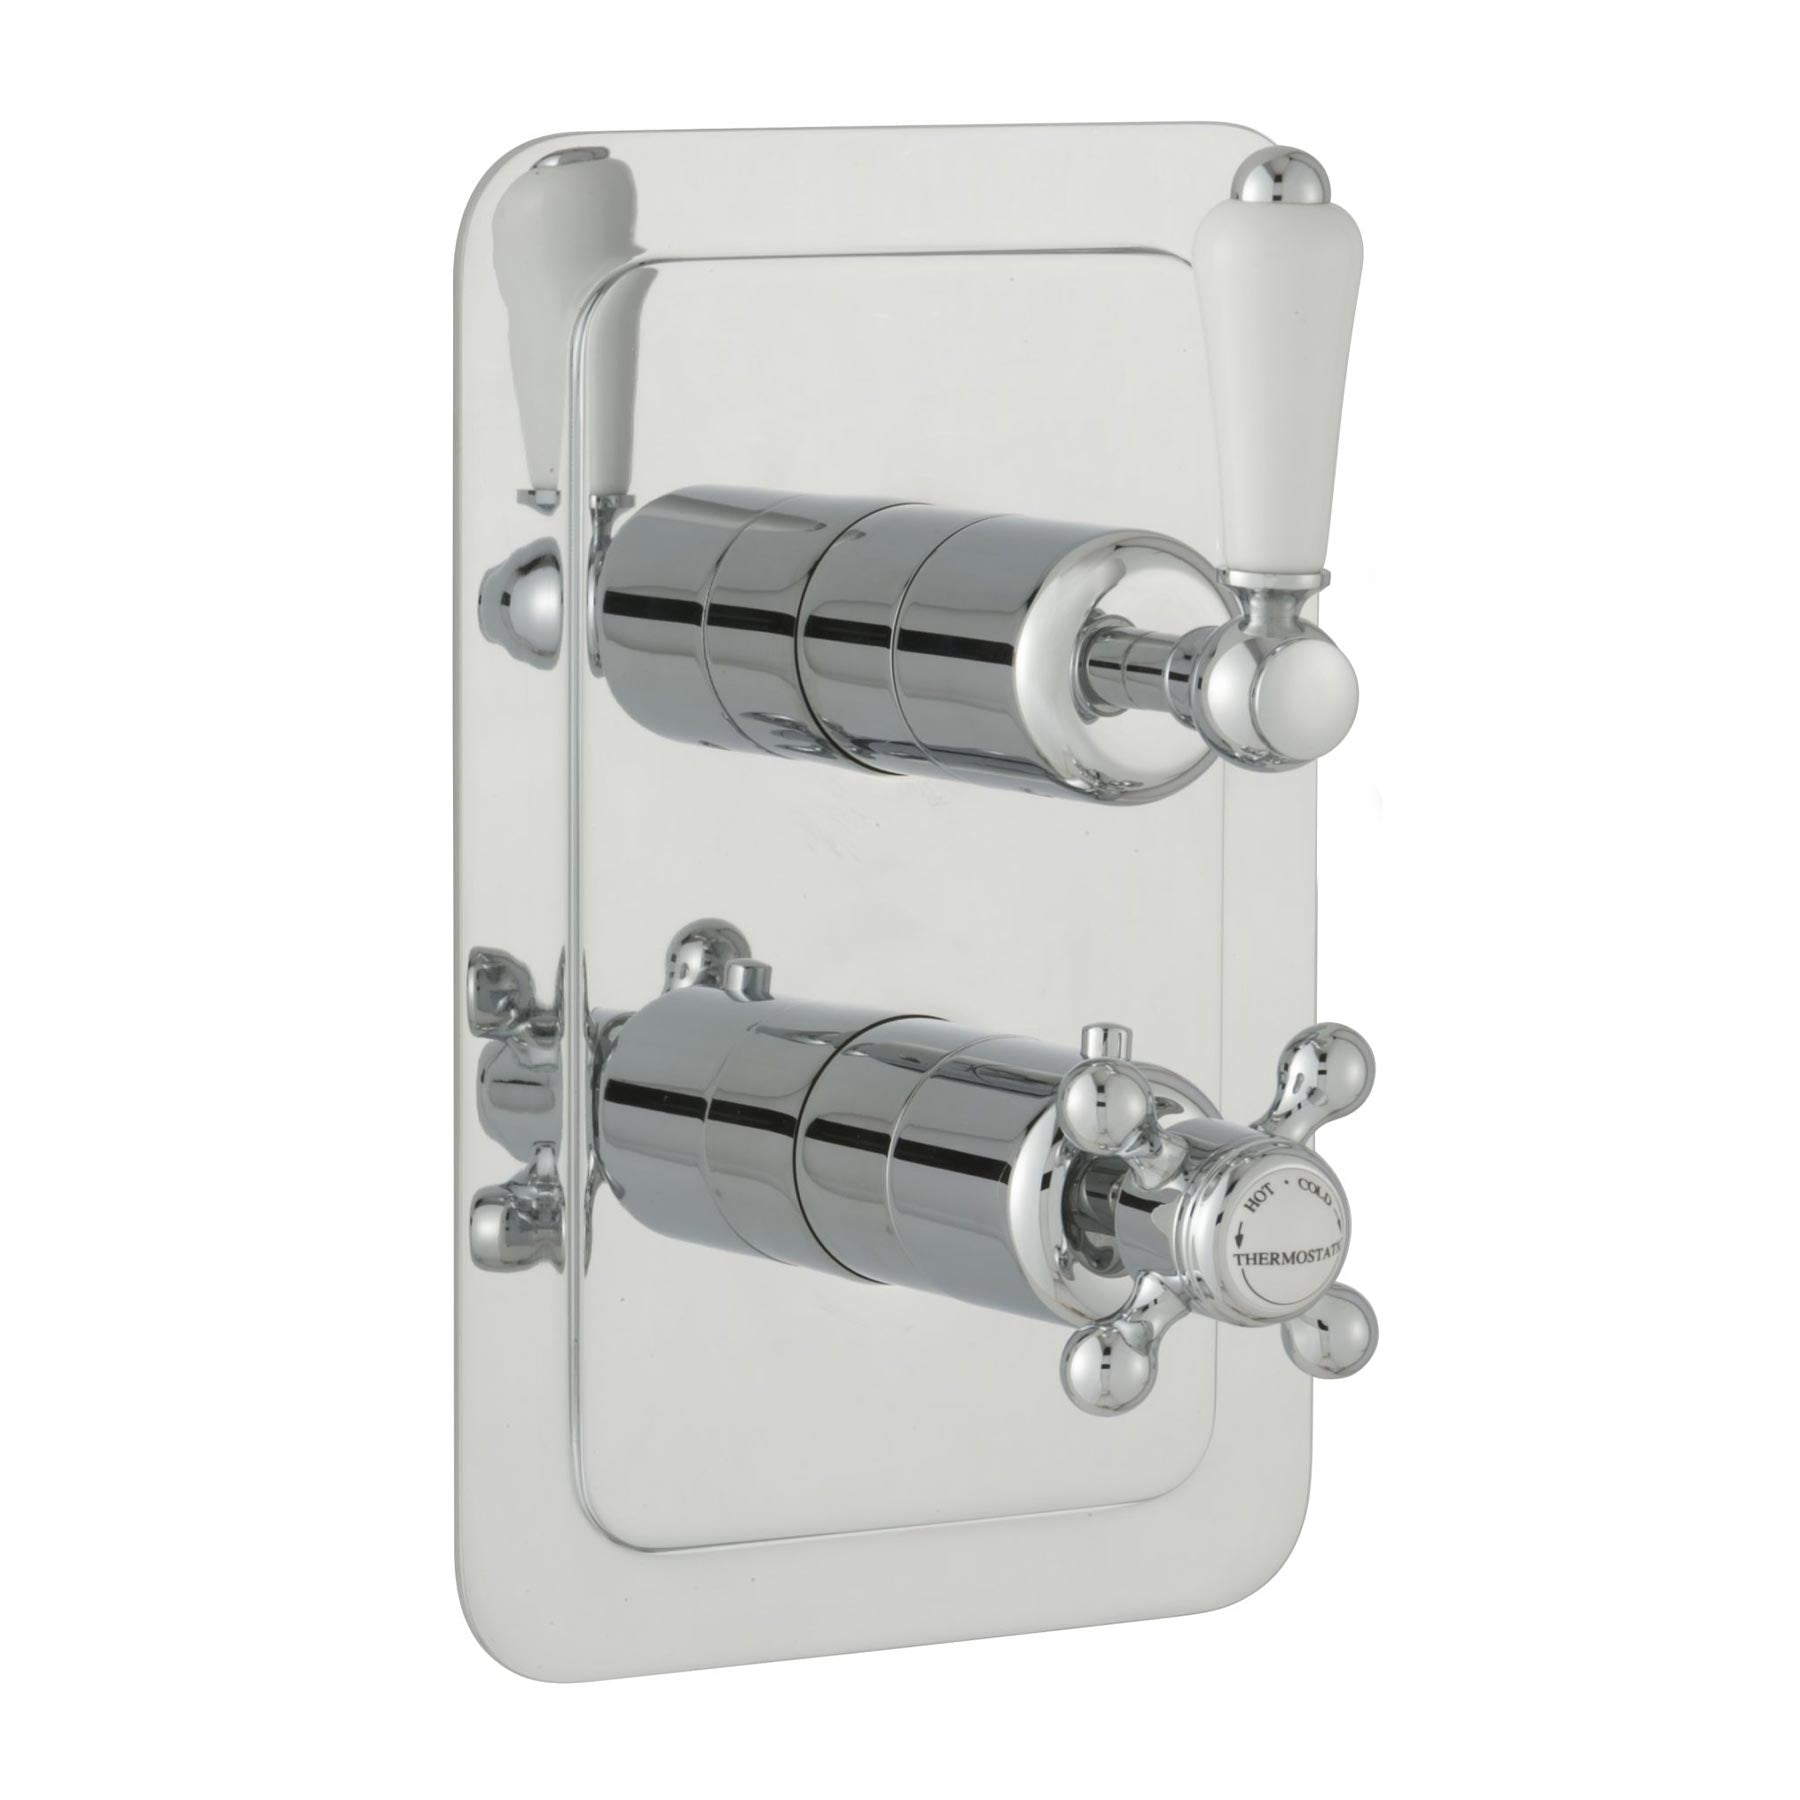 Chester Lever Two Outlet Concealed Thermostatic Shower Valve Vertical - Chrome [85671 Chrome]